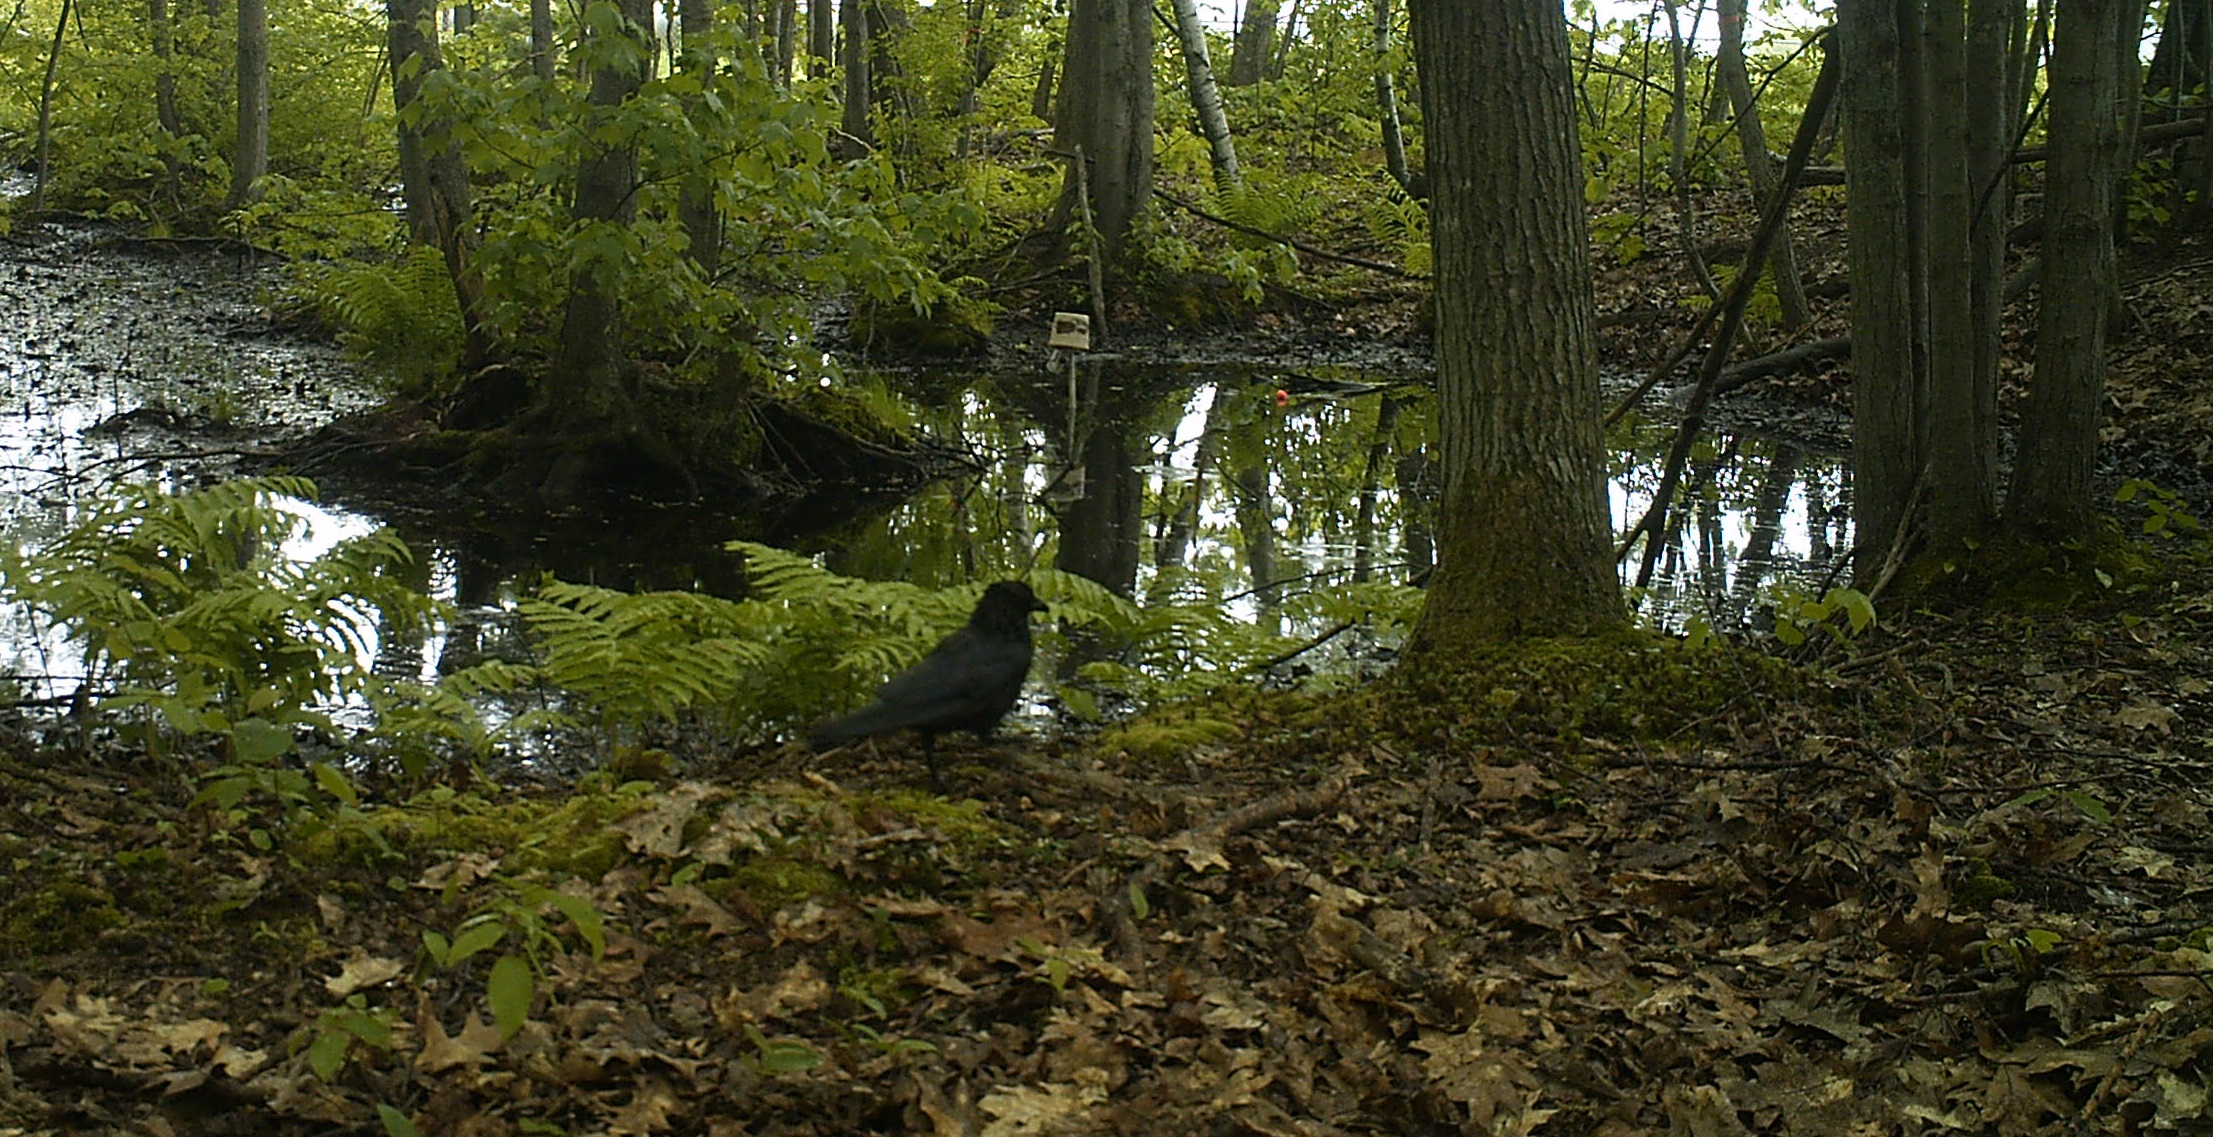 An American Crow struts the banks of a pool. Additional photos taken by our motion-sensor trail camera show this crow scratching through the fallen leaves. Photo credit: Pools and People Trail Camera